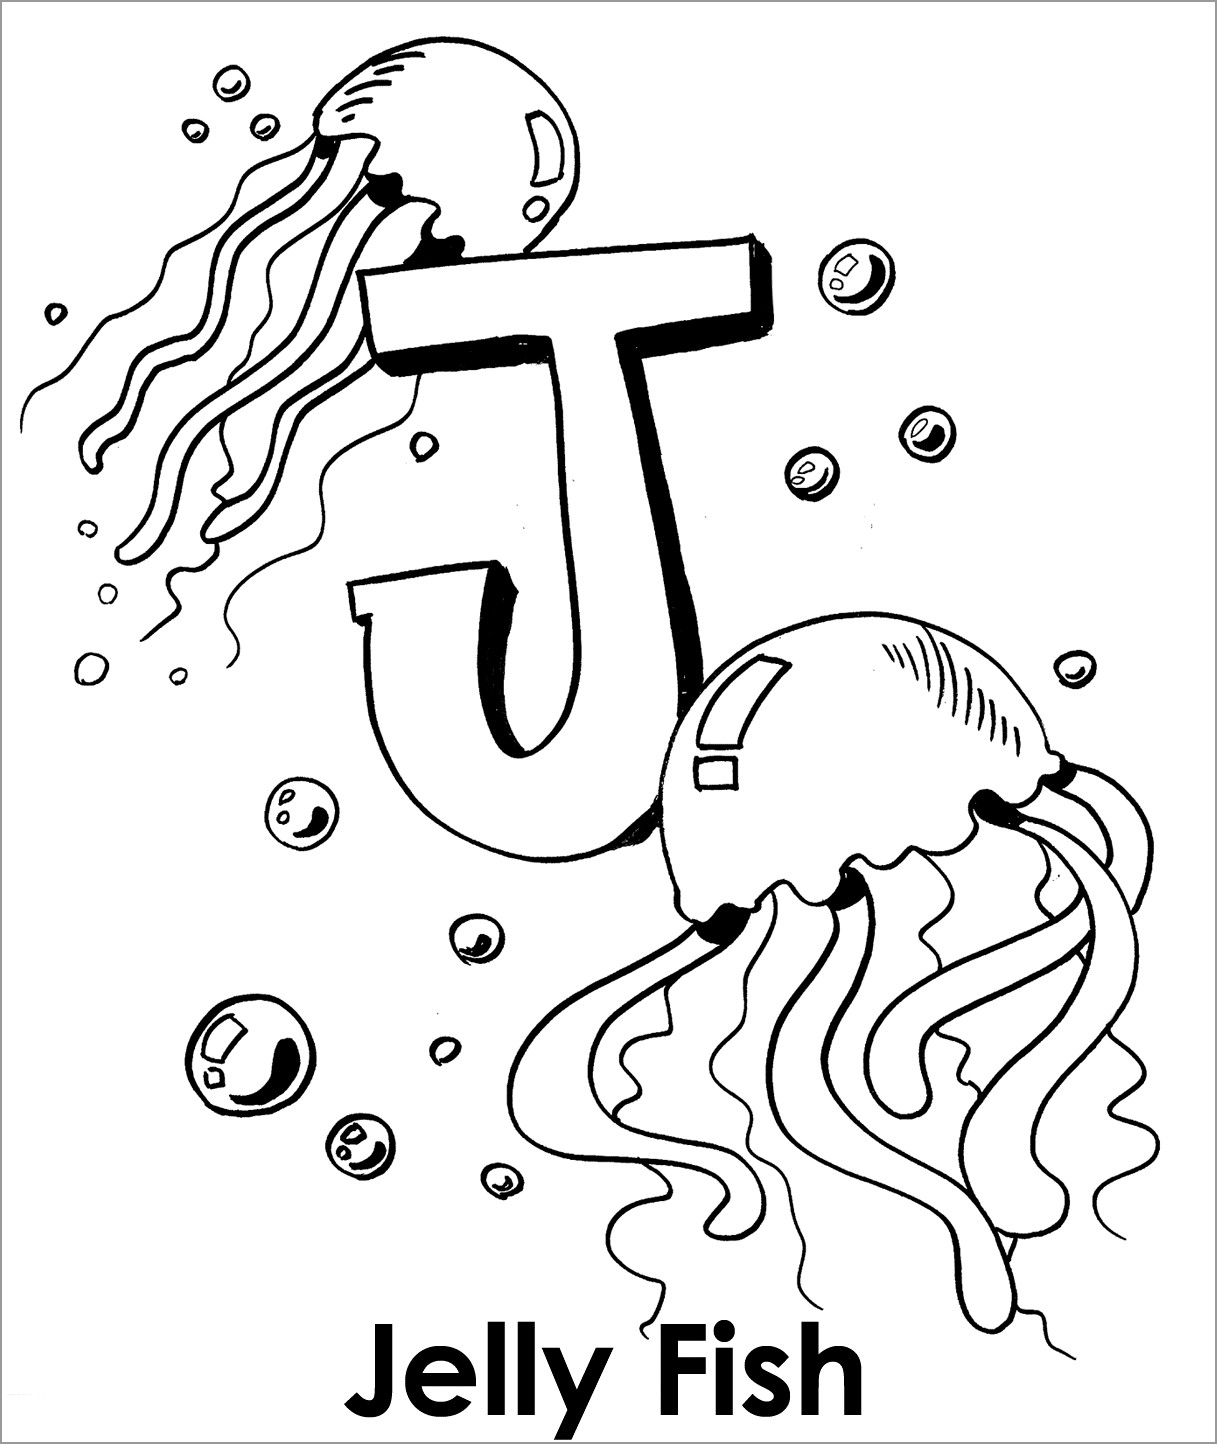 J for Jellyfish Coloring Page